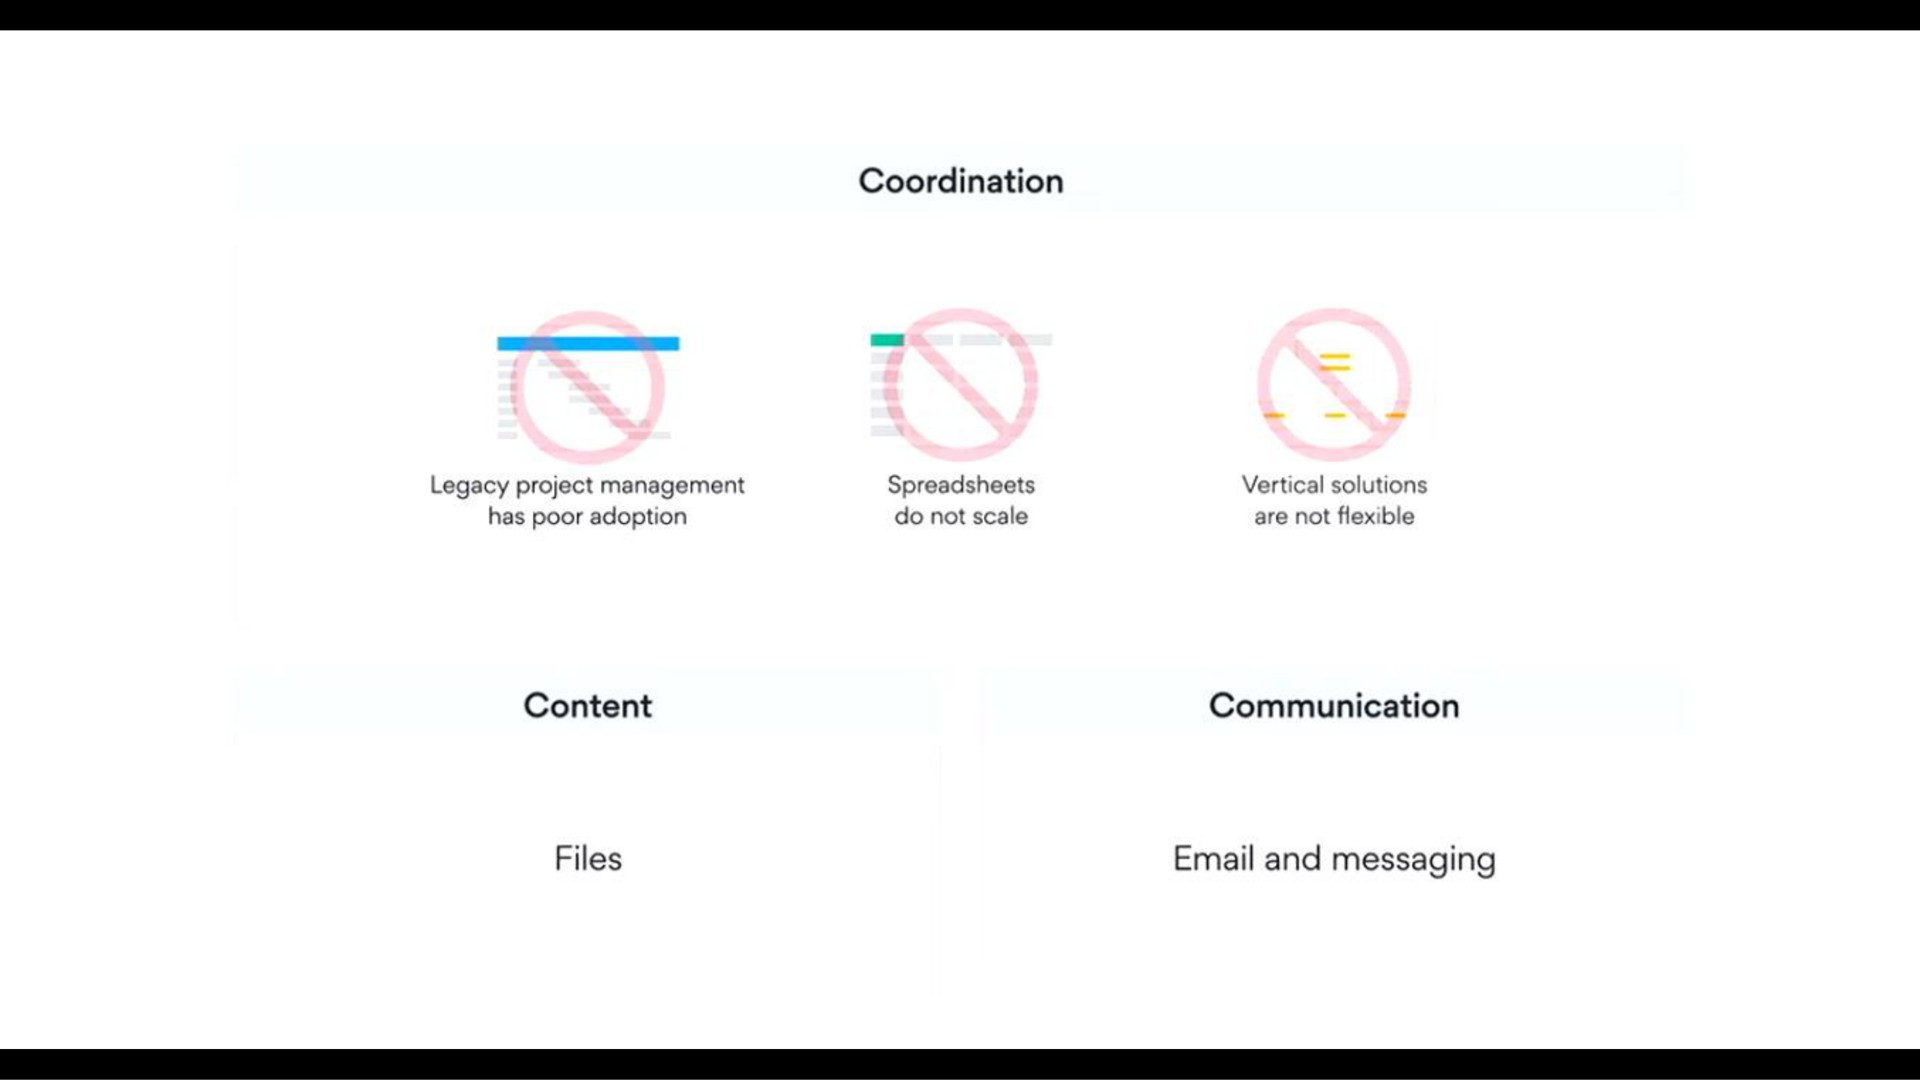 content files communication and messaging | Asana